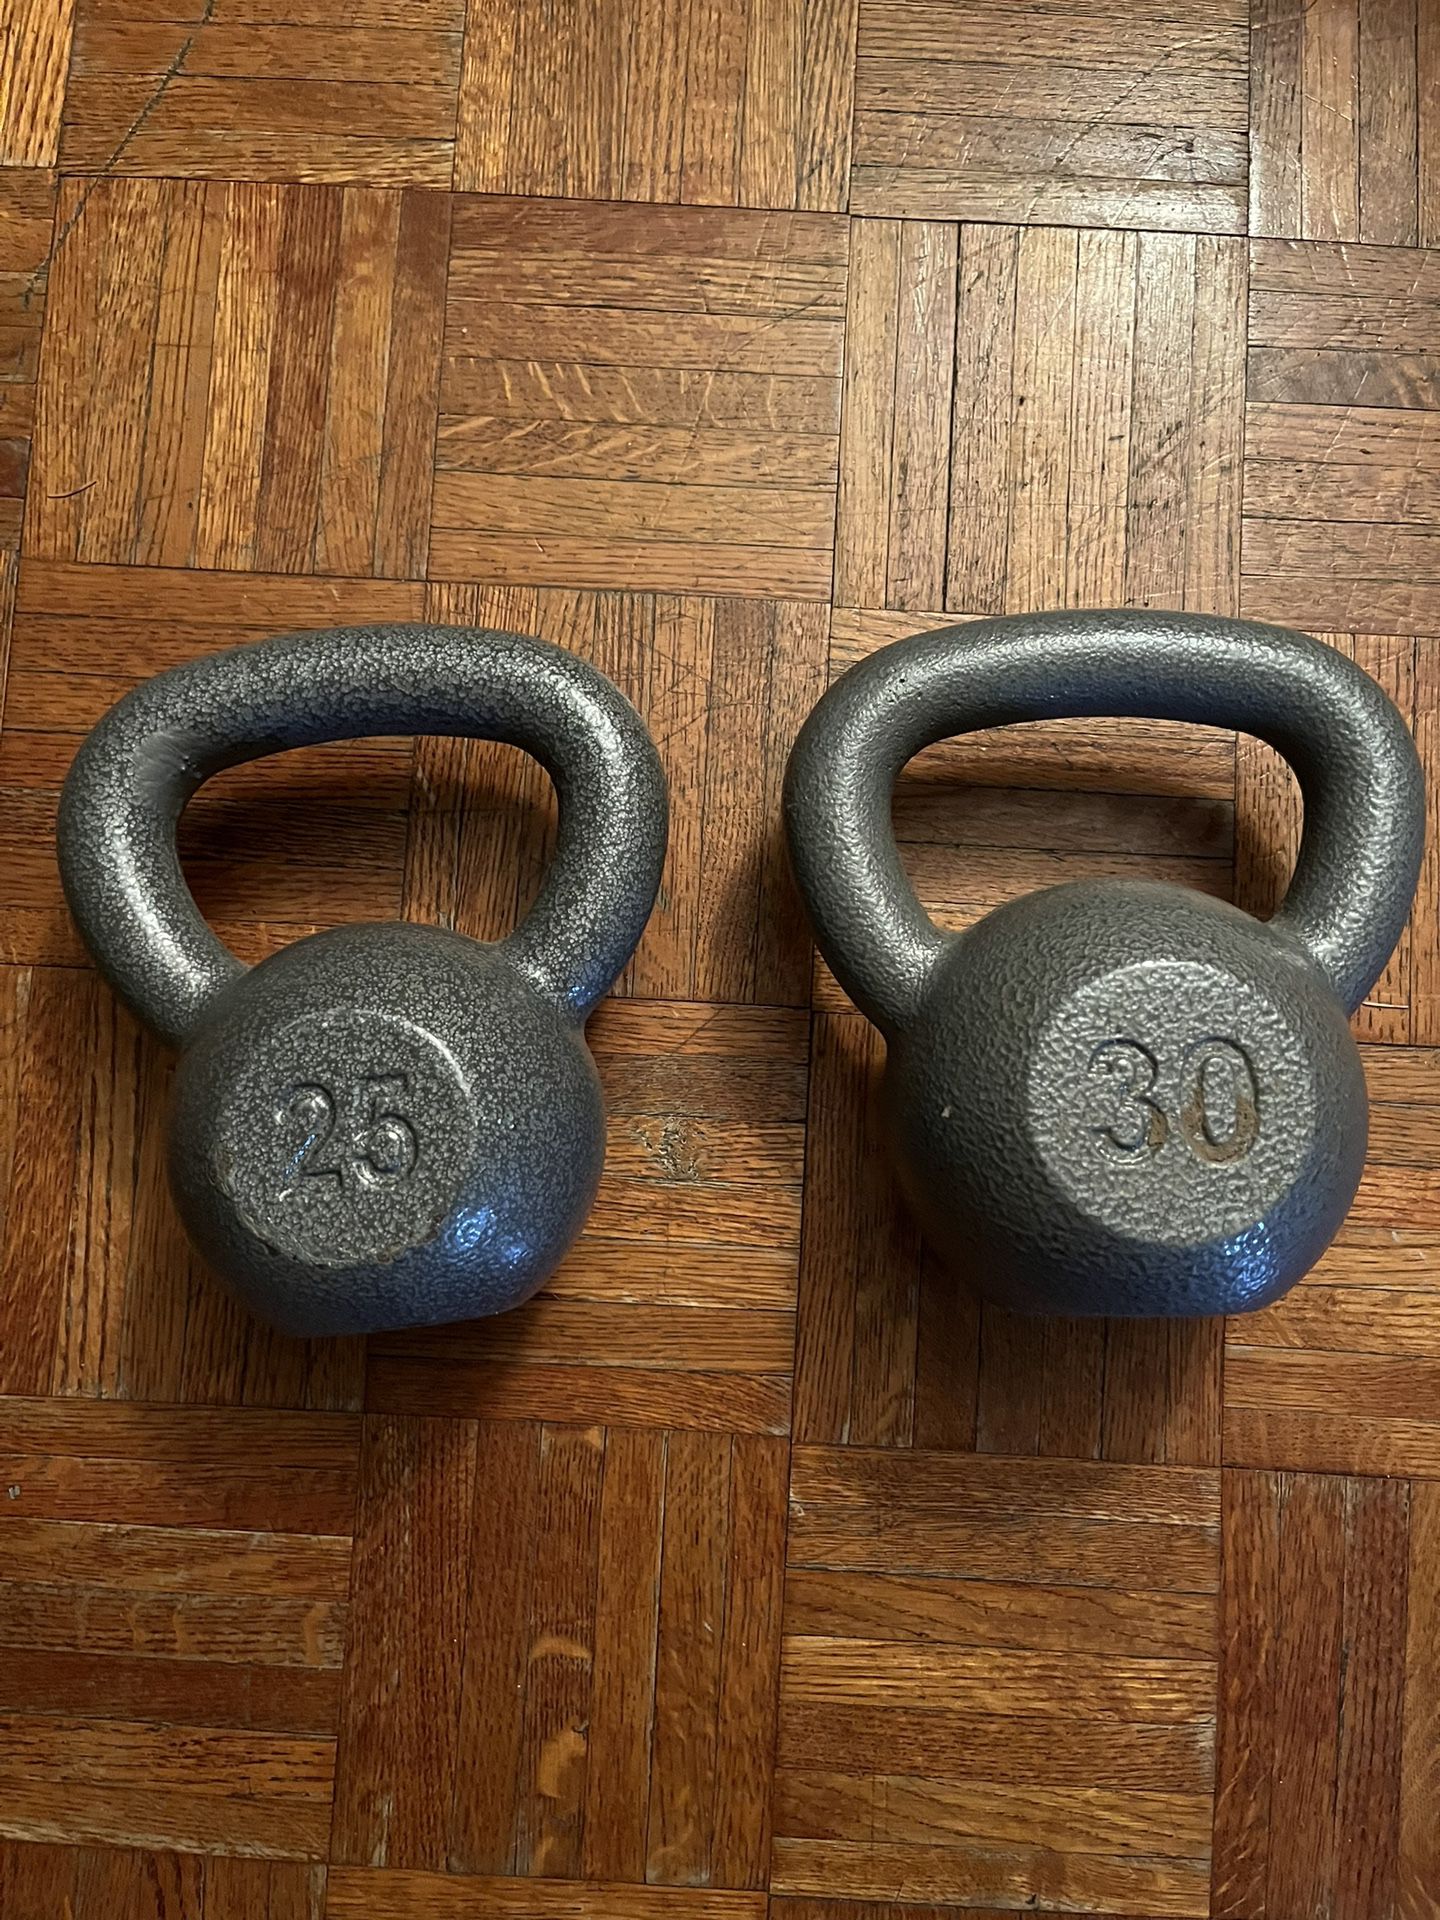 Kettle Bell Weights  25lbs, 30lbs 